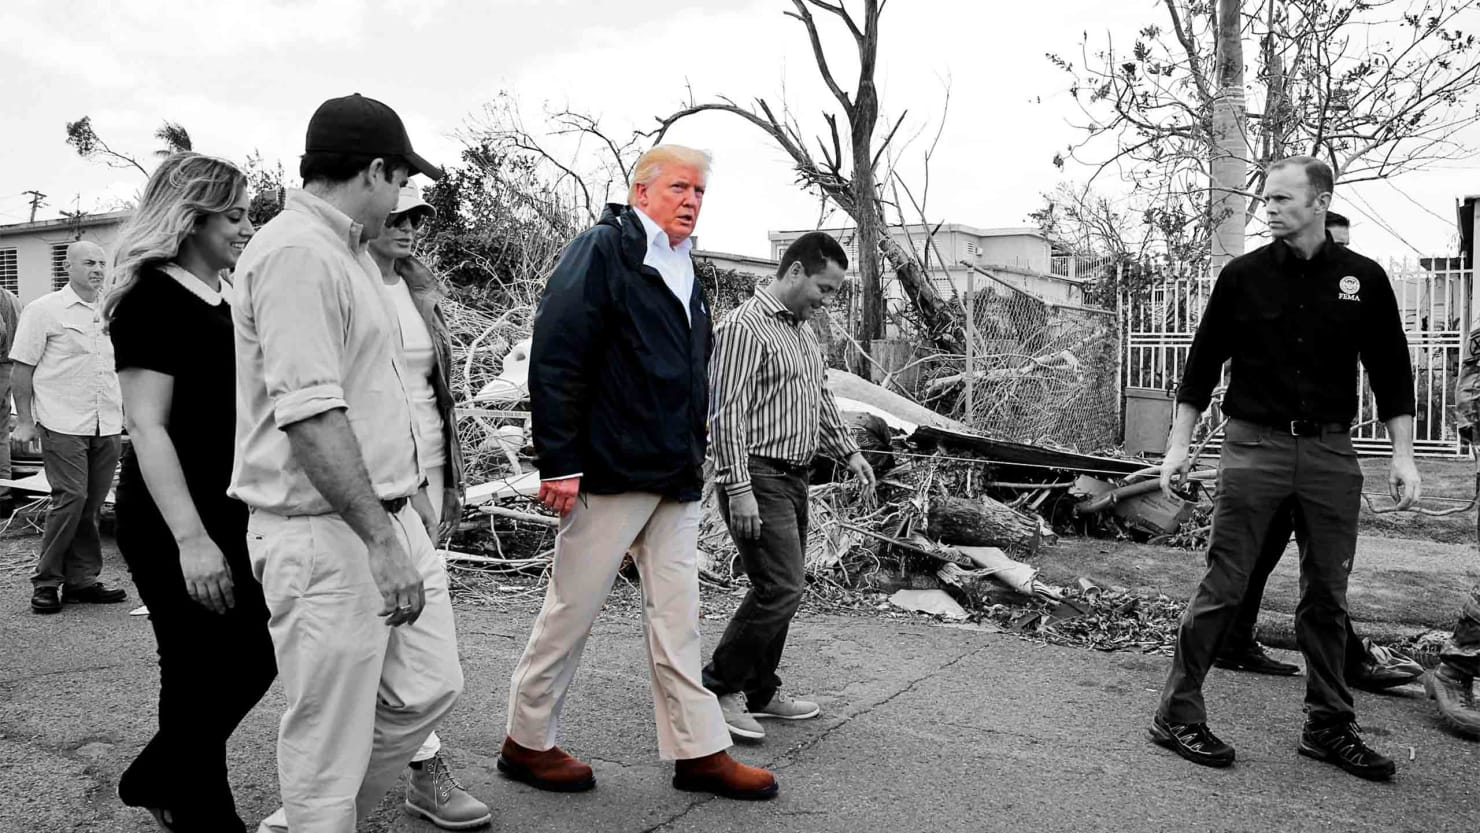 Which Was Worse for Puerto Rico, Hurricane Maria or Hurricane Donald?